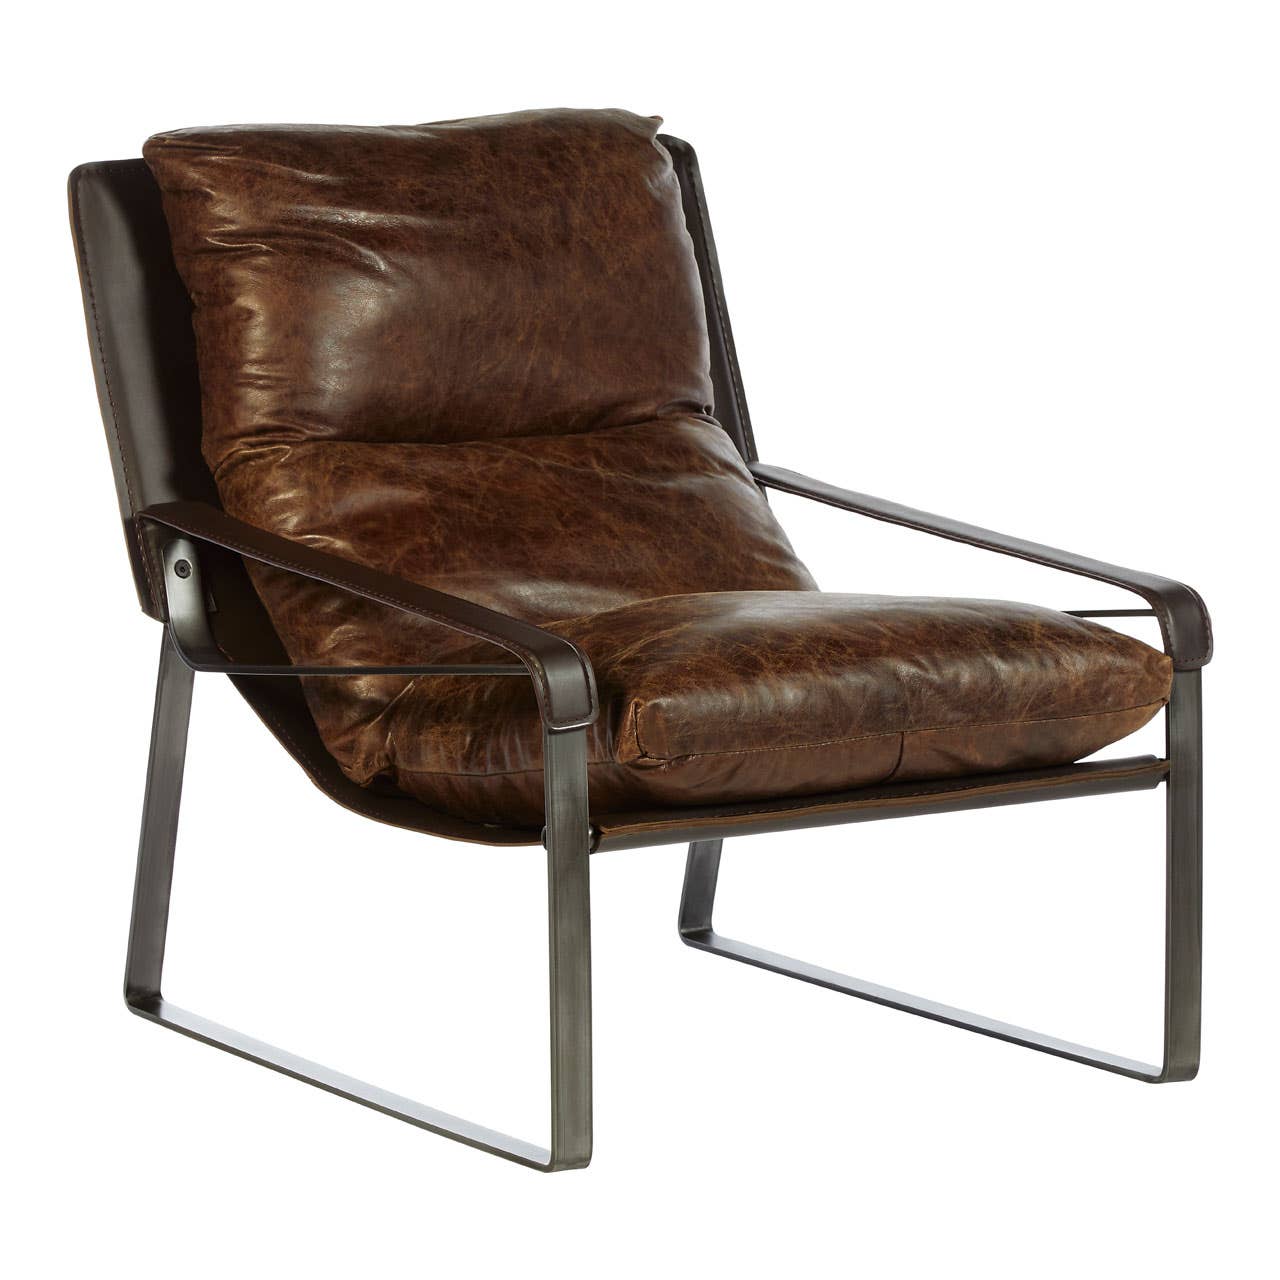 Hoxton Brown Leather Sledge Base Lounge Chair